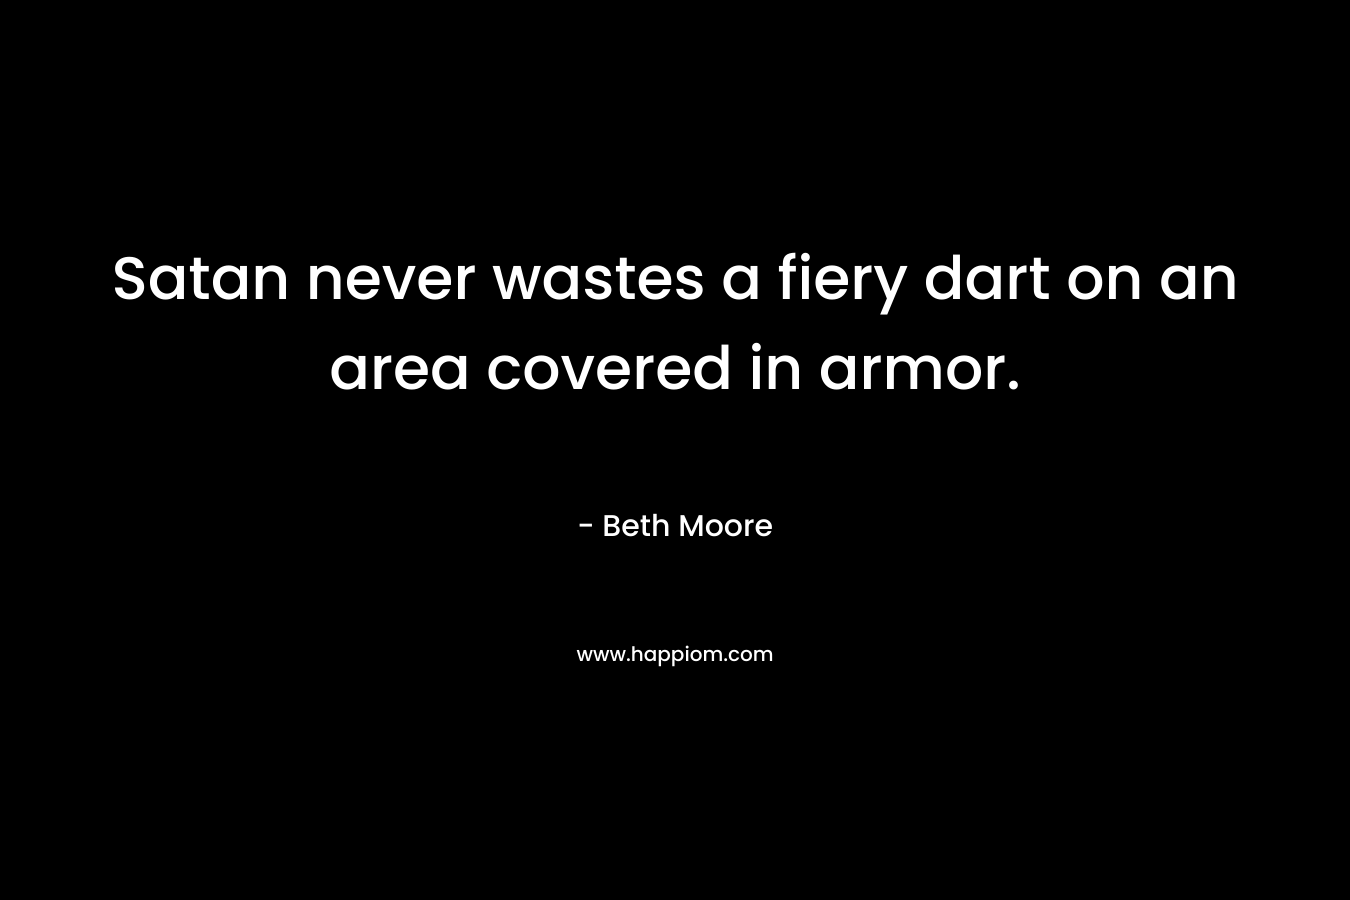 Satan never wastes a fiery dart on an area covered in armor. – Beth Moore